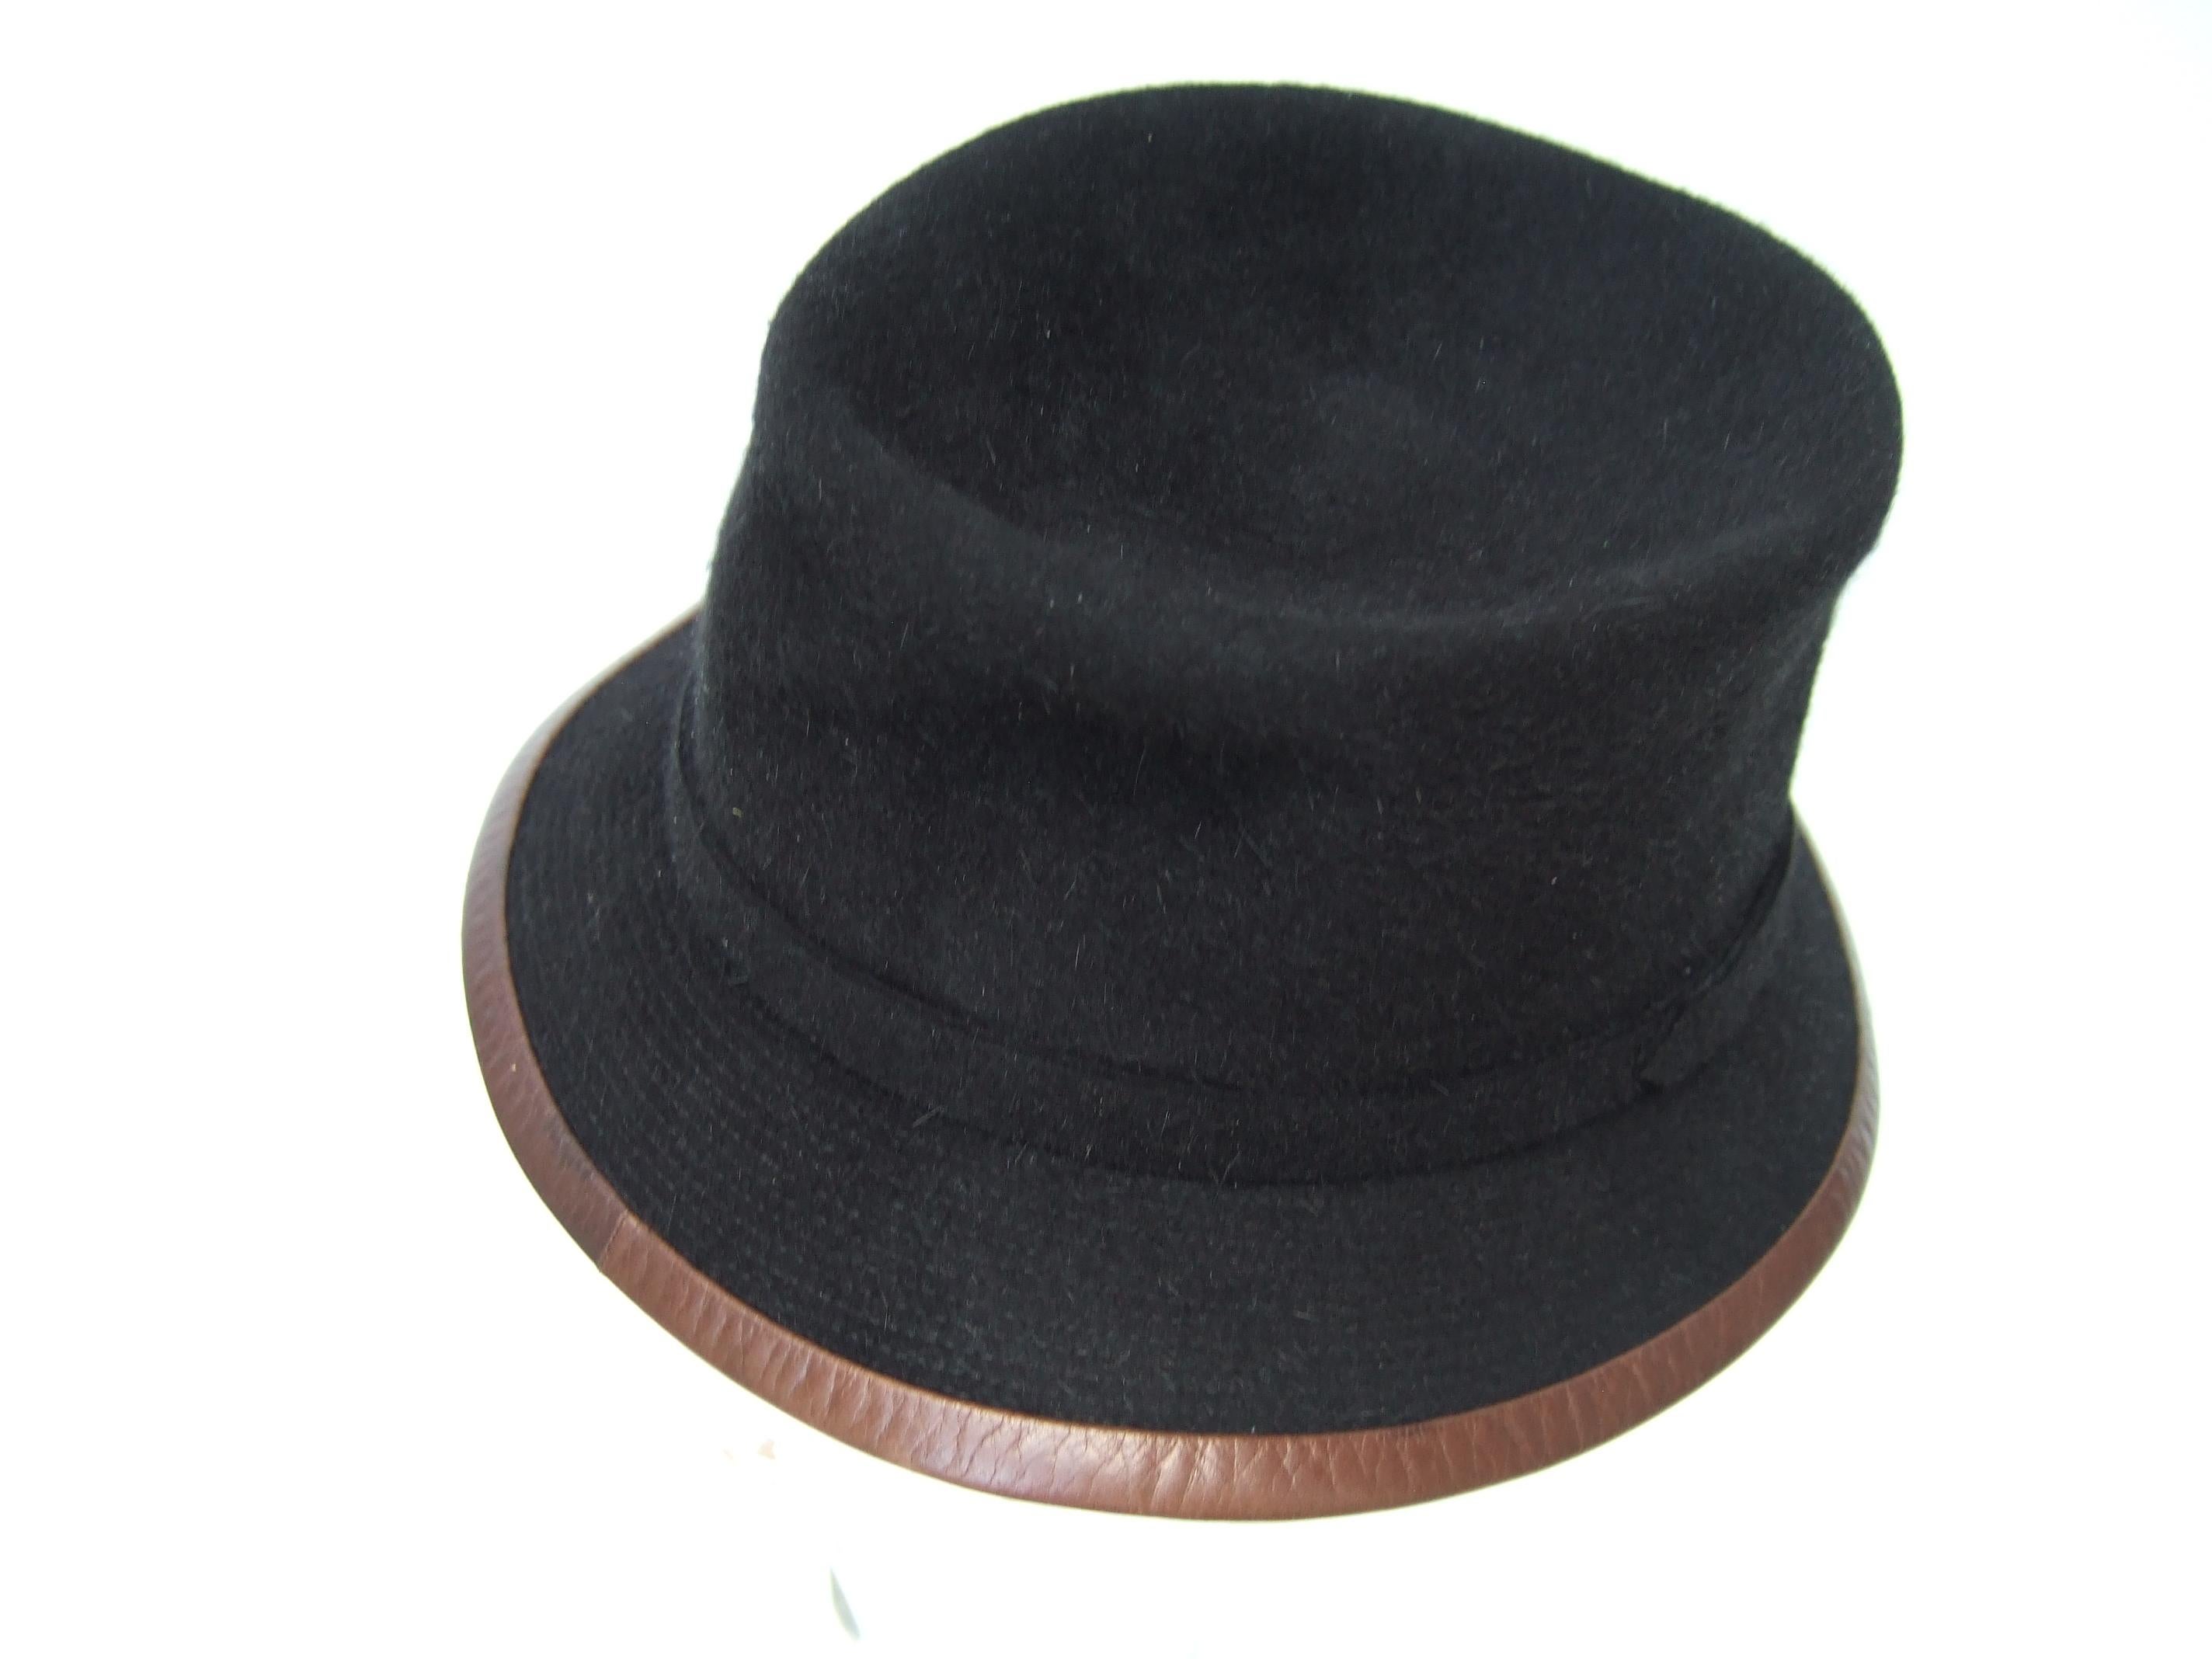 Hermes Paris Black Wool Leather Trim Hat Labeled Motsch Chapeaux Pour Hermes  In Good Condition For Sale In University City, MO